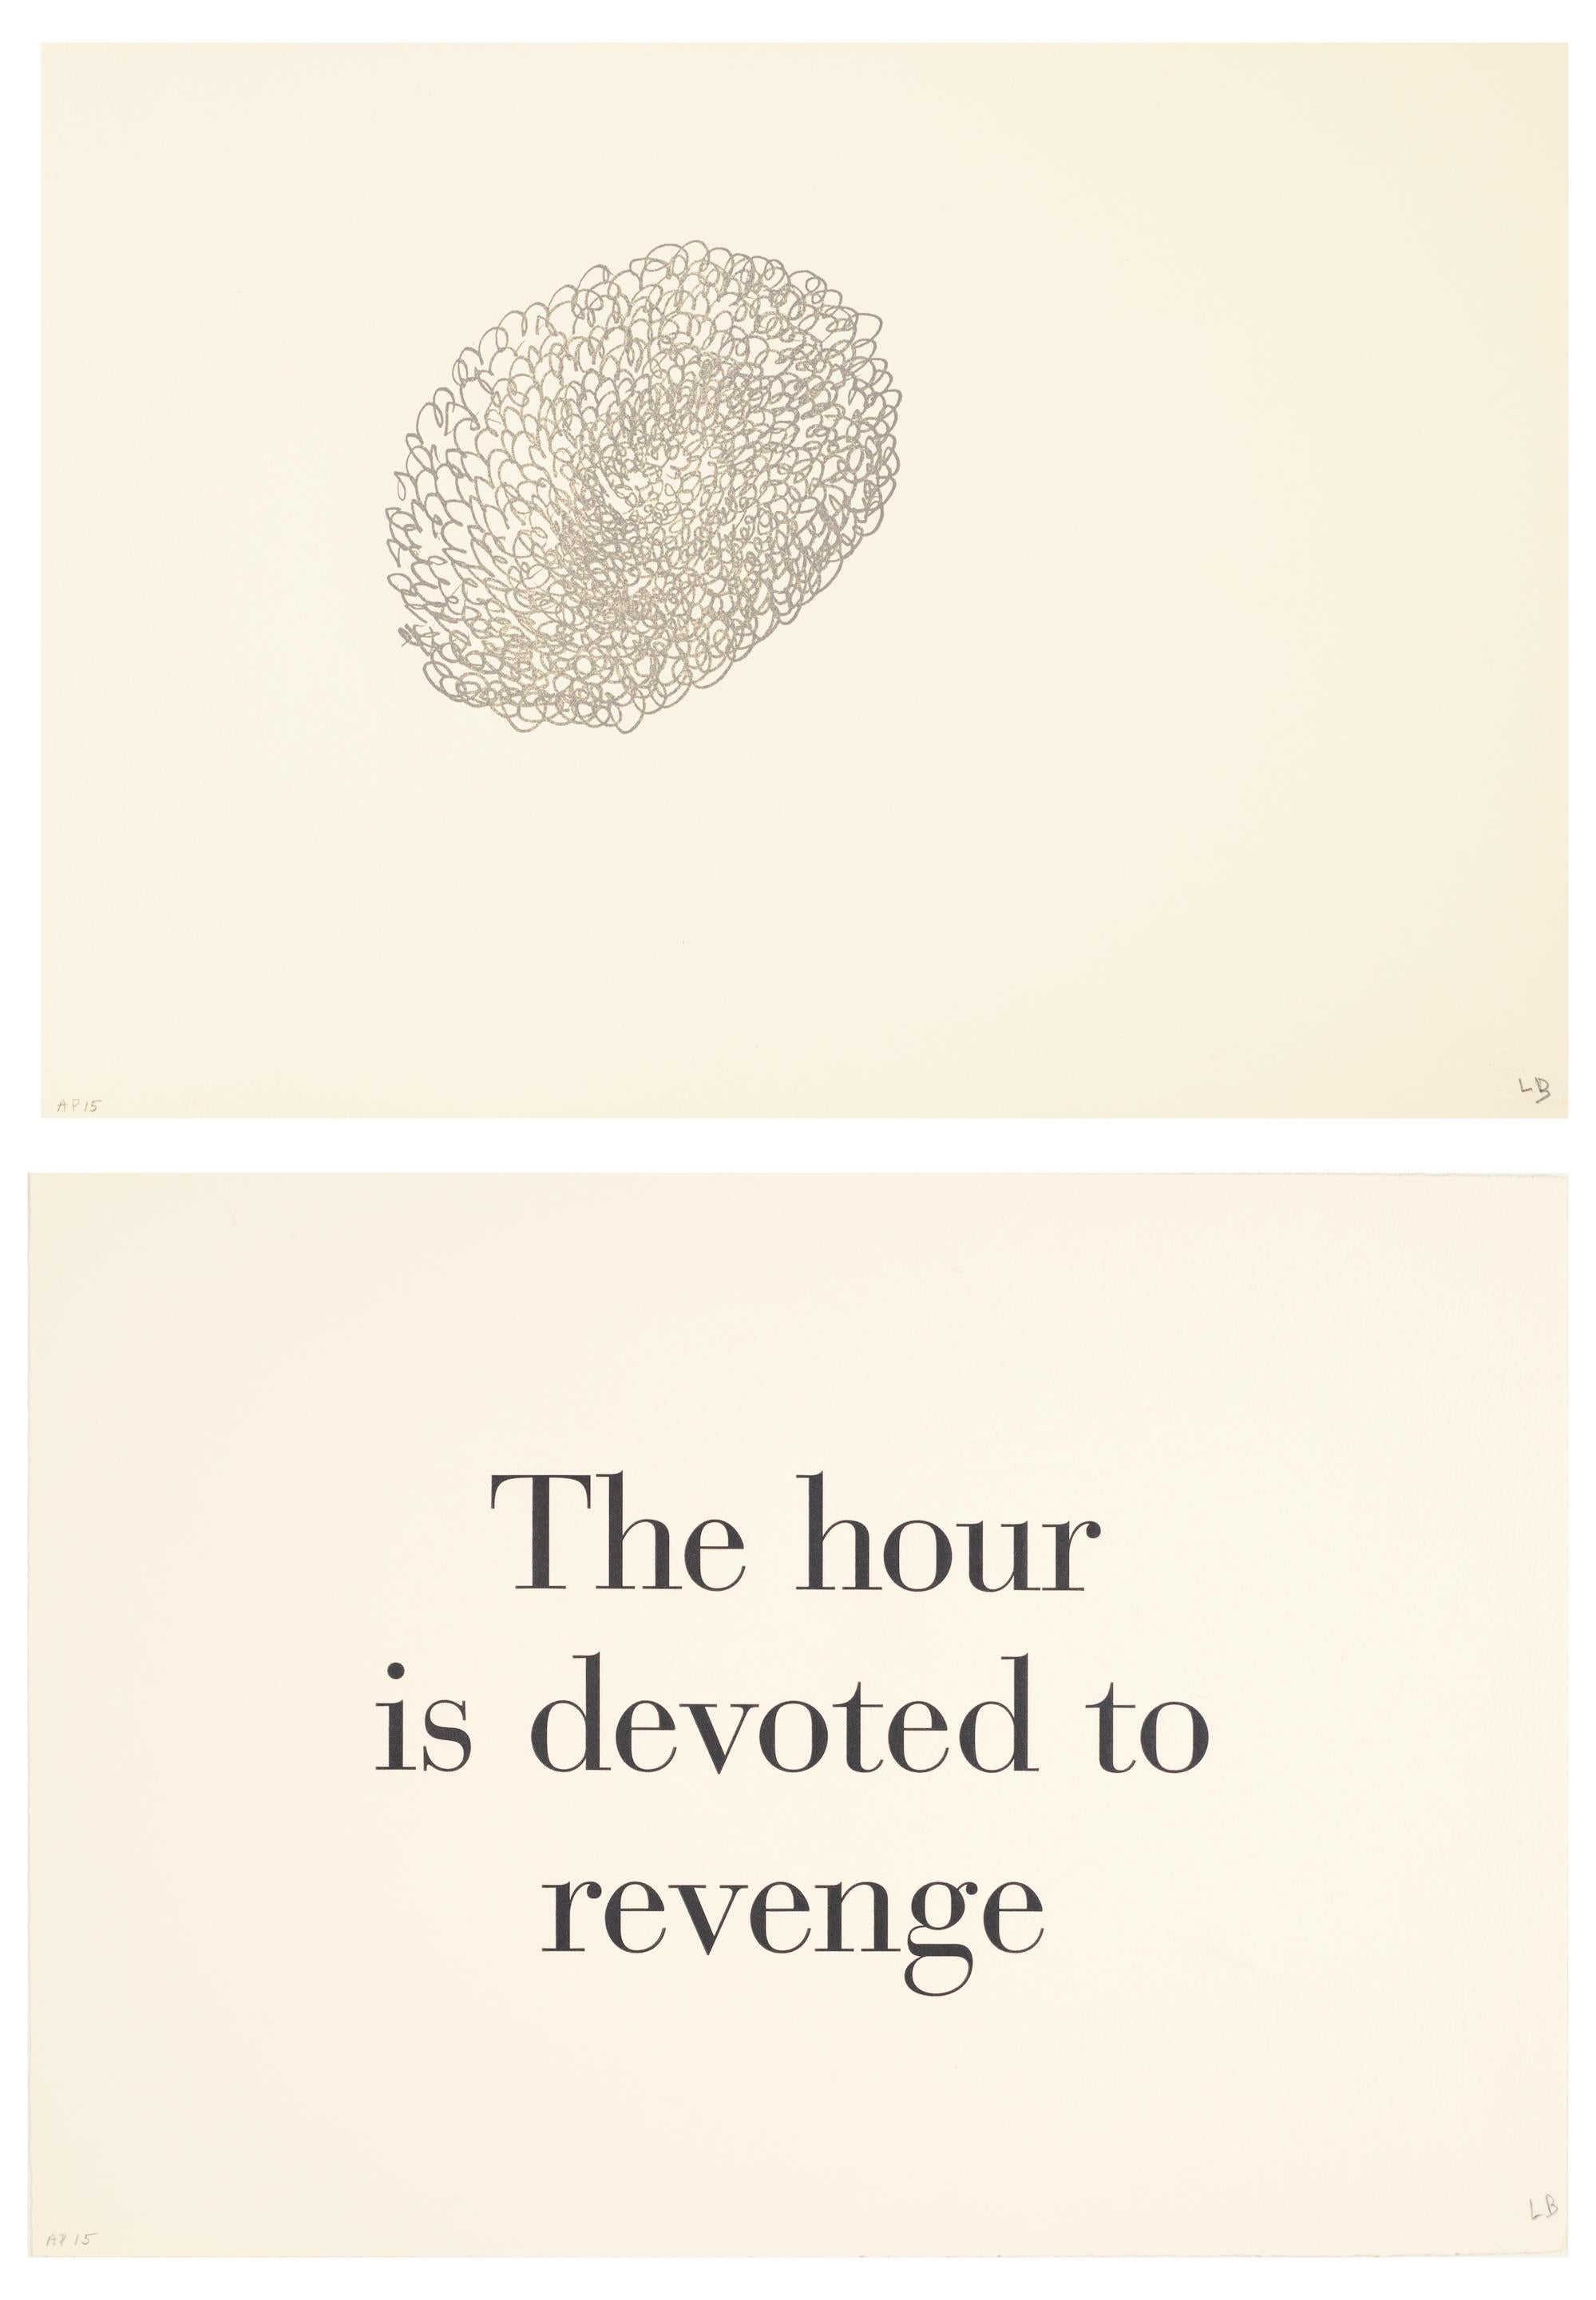 Louise Bourgeois Abstract Print - The Hour Is Devoted to Revenge -- Letterpress, Lithograph, Text Art by Bourgeois